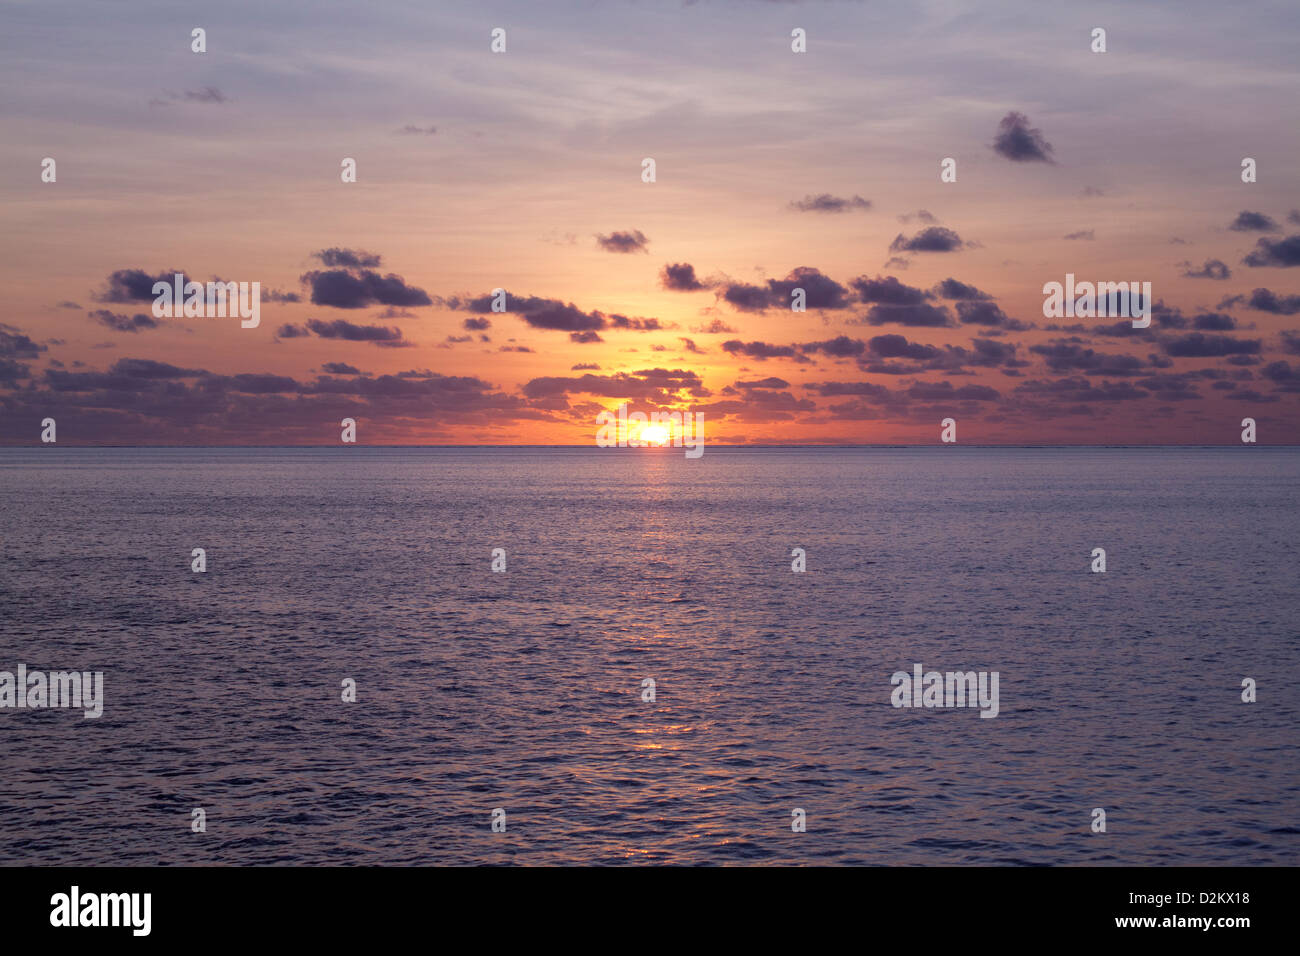 Sunset on the sea at the Great Barrier Reef, Australia Stock Photo